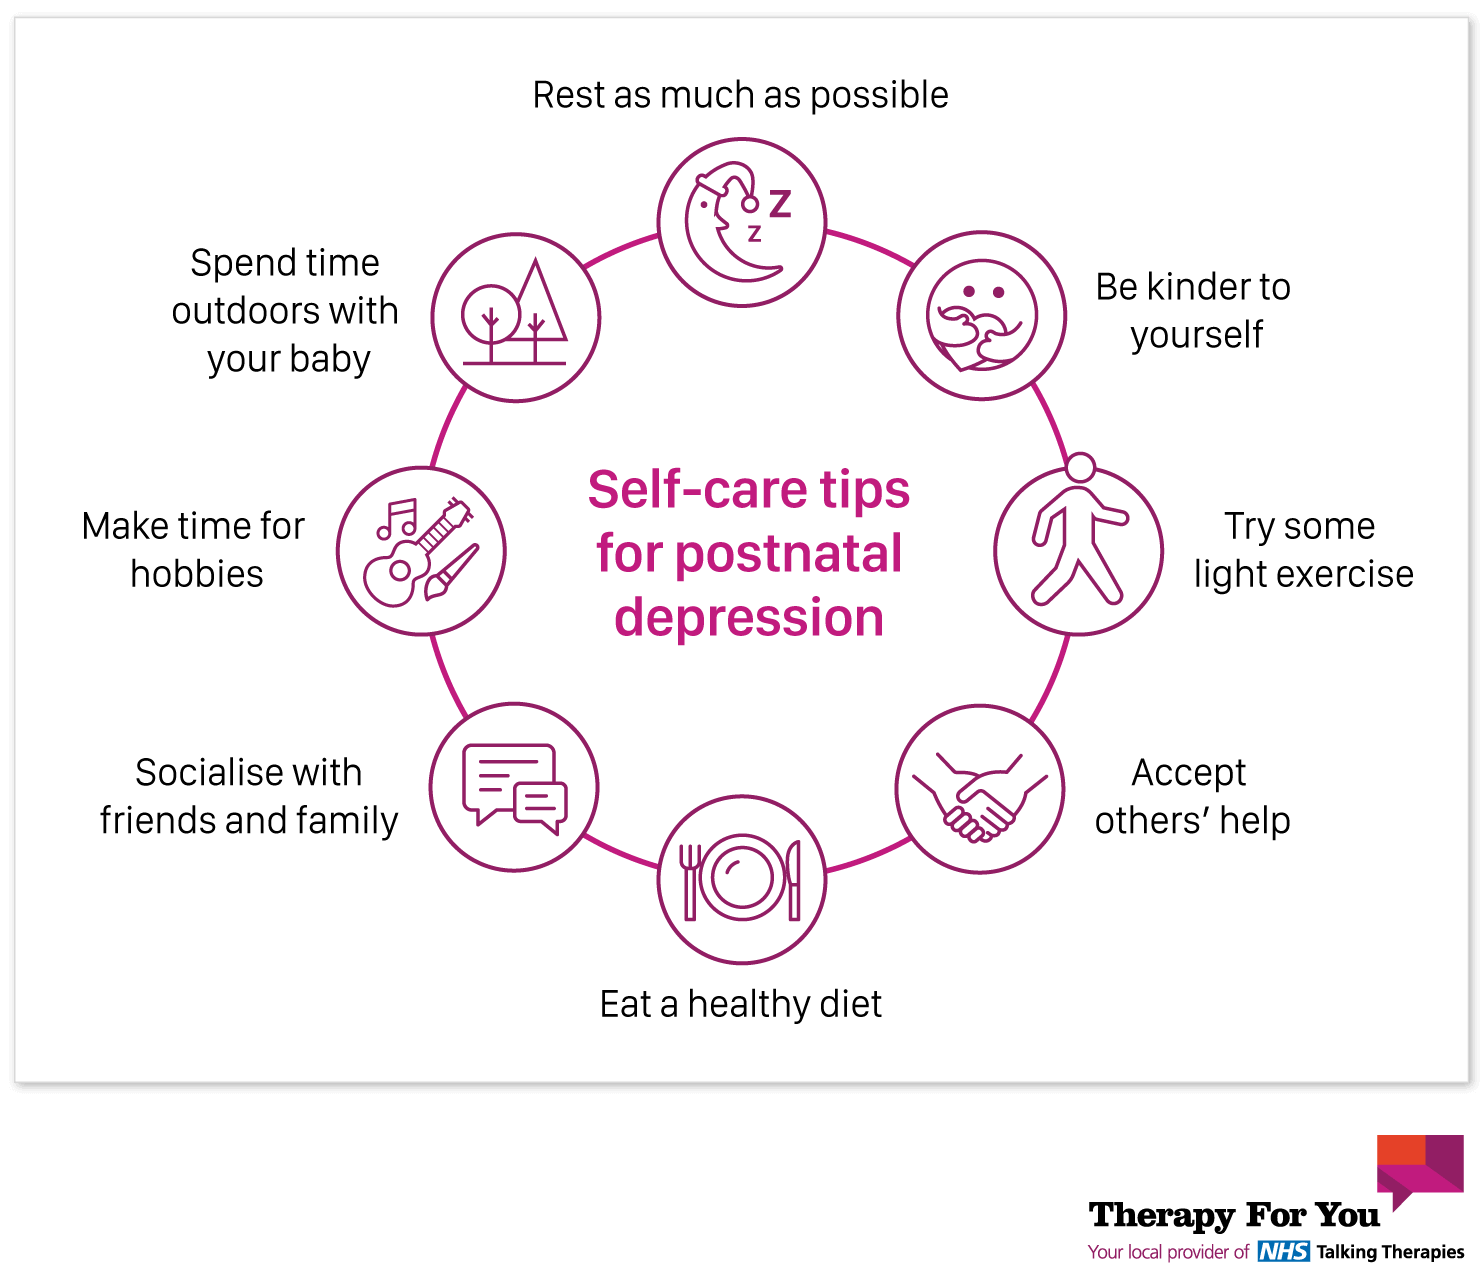 Self care techniques to improve postnatal depression - exercise, healthy diet, sleep and interests